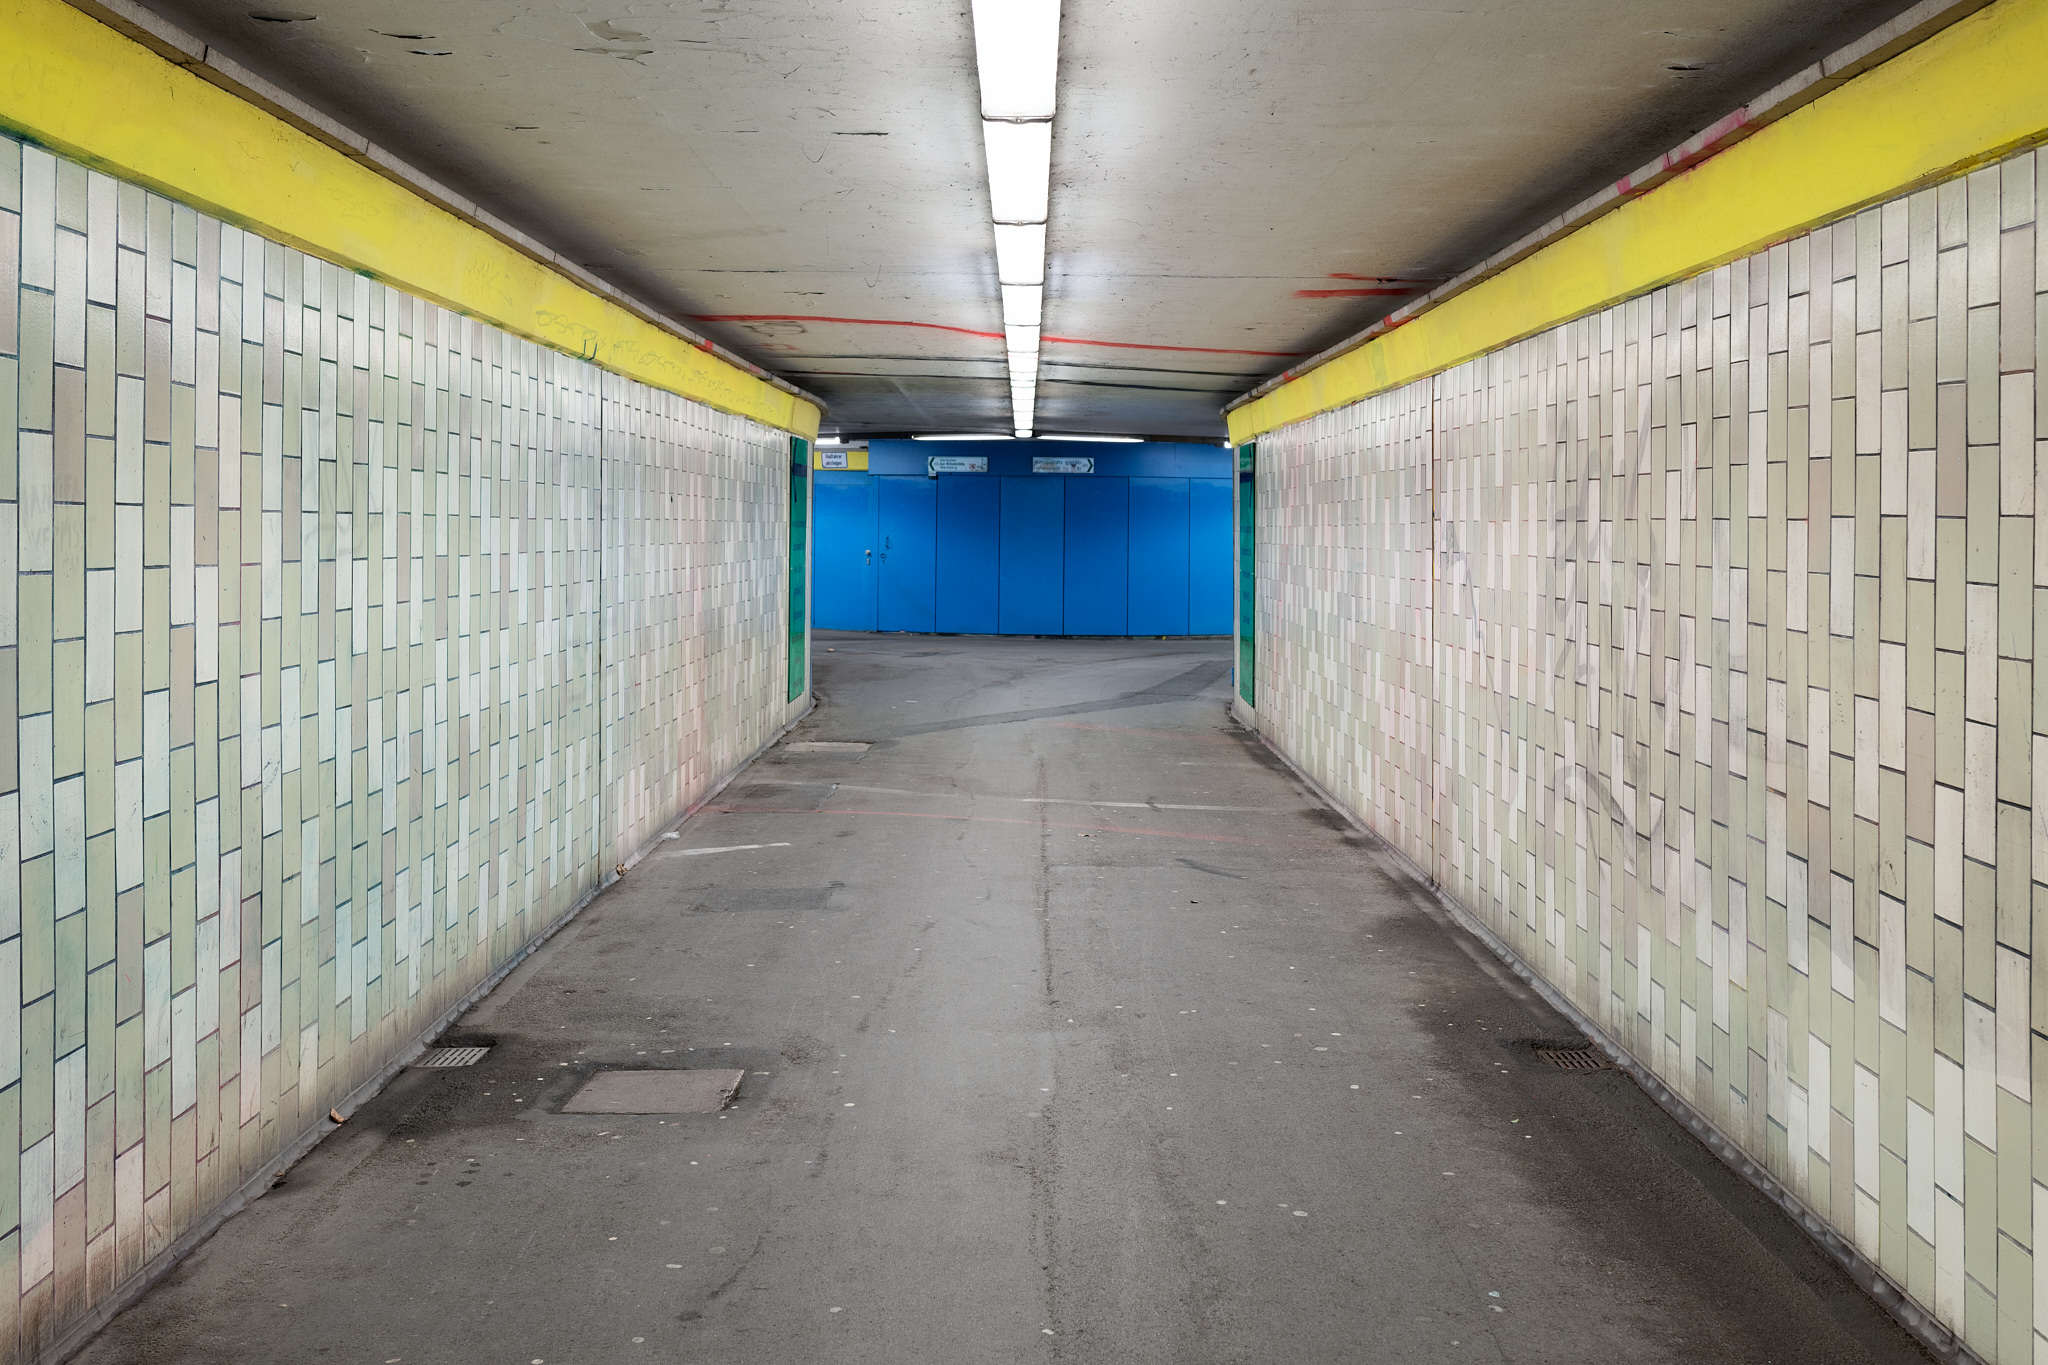 The photo shows the tunnel of an underpass. On the right and left a wall with white and green tiles in 50s style, bright neon light at the top of the ceiling, the floor gray concrete, the back wall in bright cobalt blue.